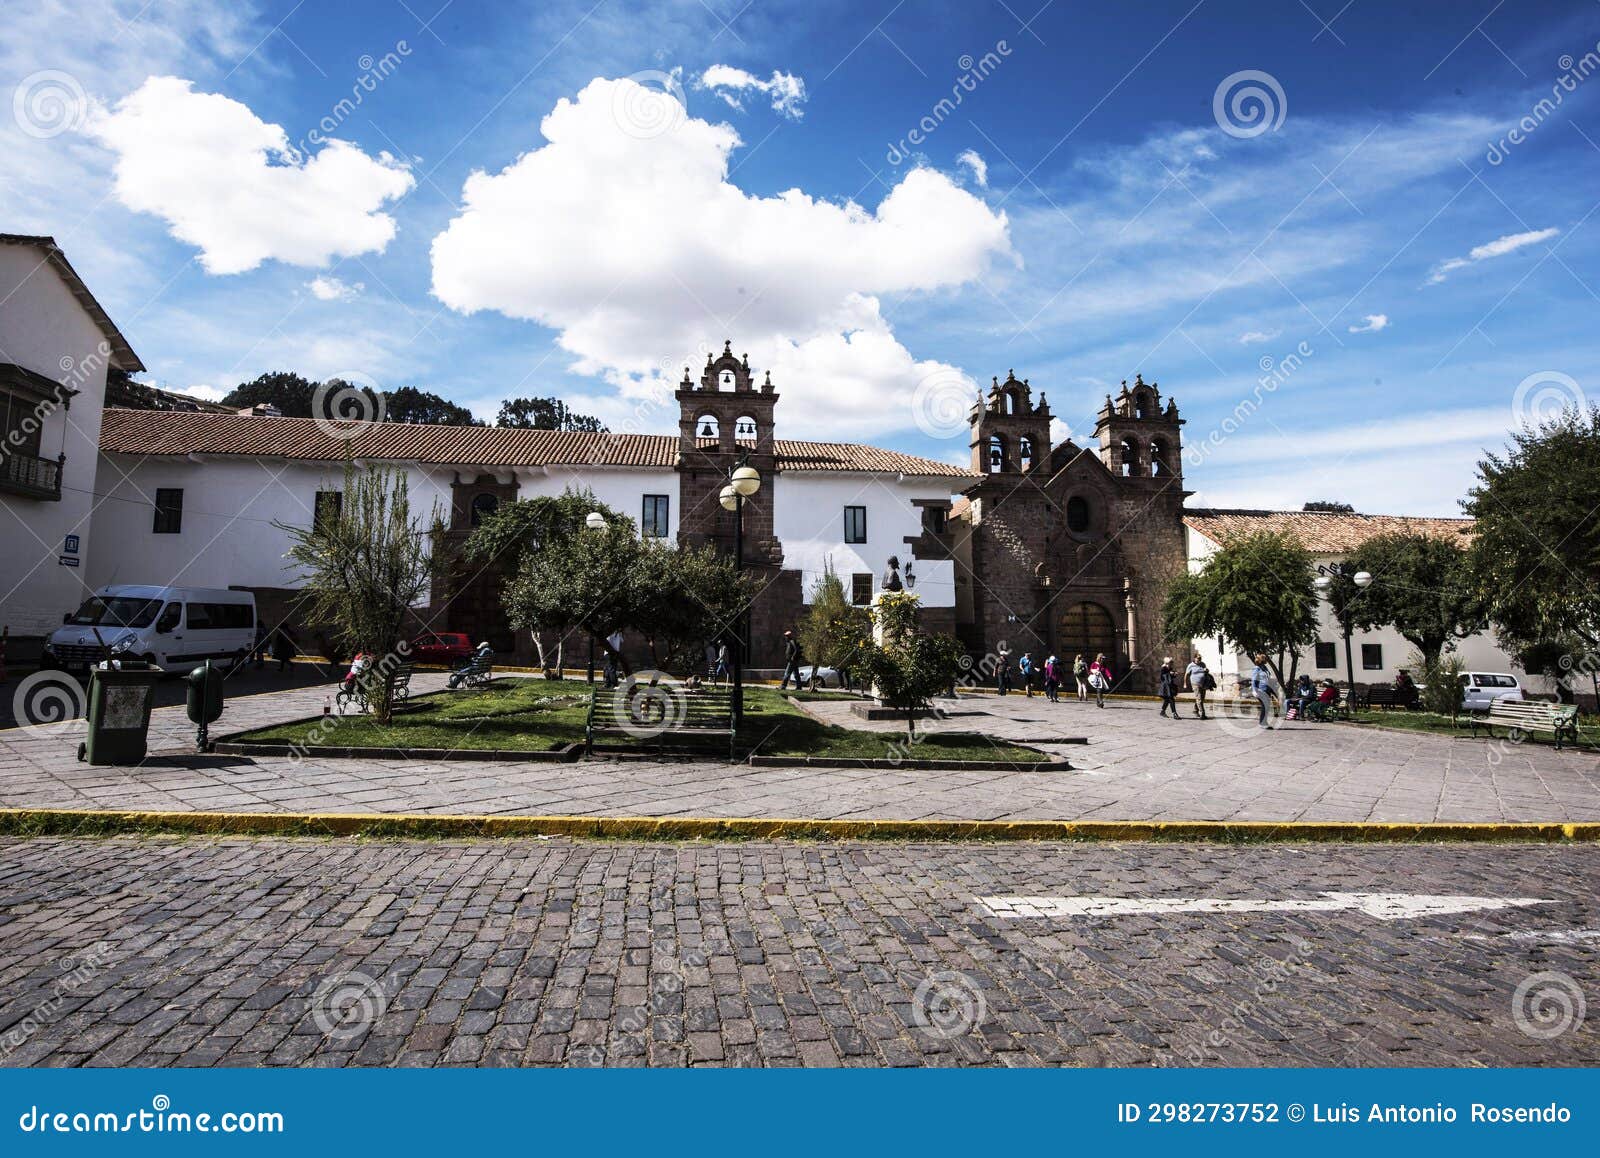 peru cusco architecture of the ancient belmond monastery hotel from the year 1592 in the historic center,16th facade